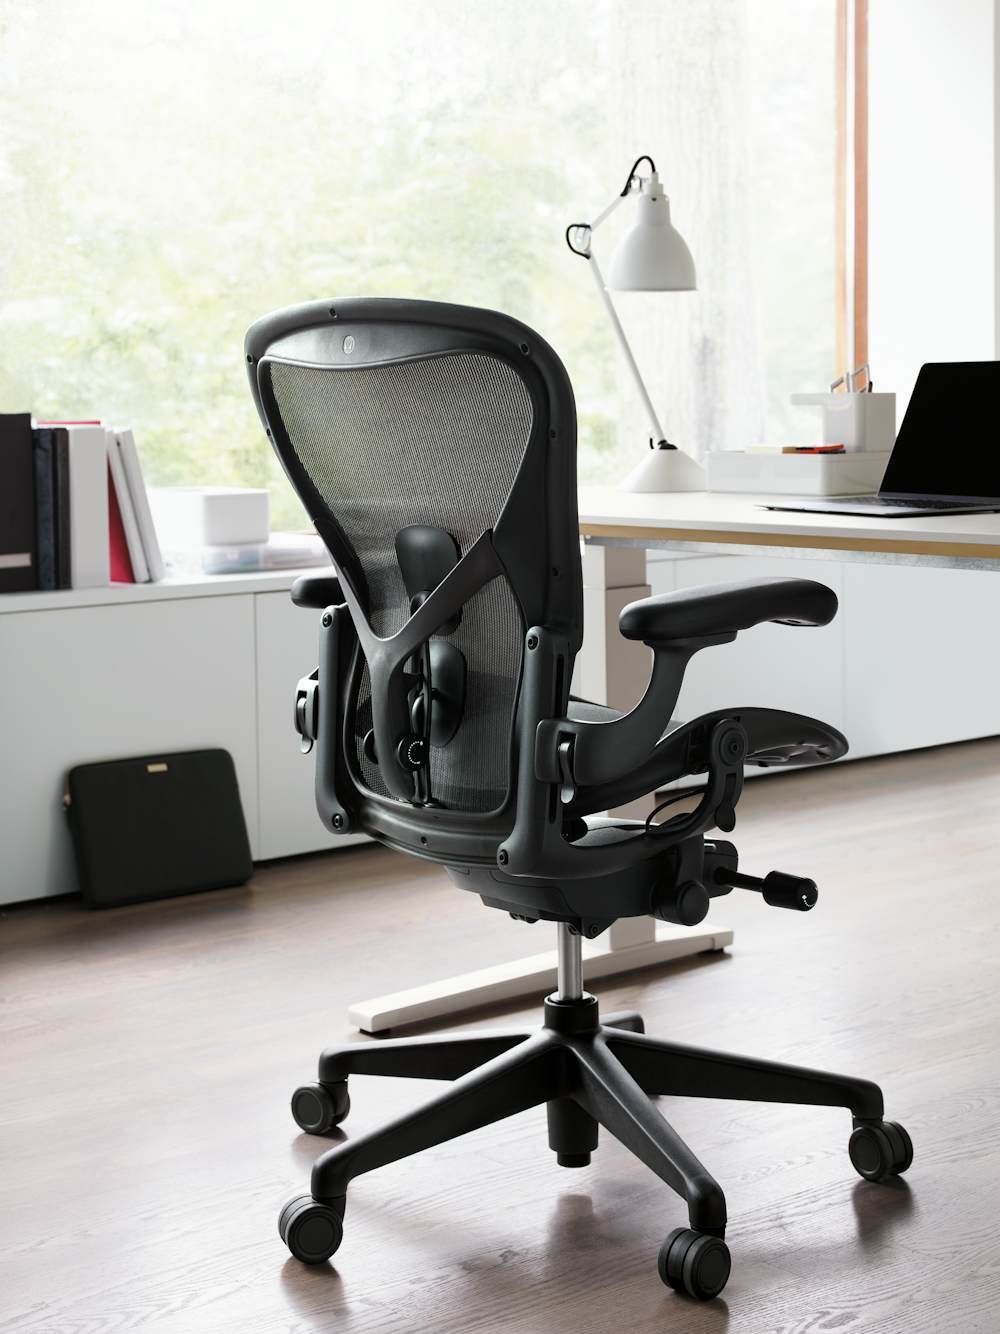 Aeron Chair and Jarvis Standing Desk in a home office setting